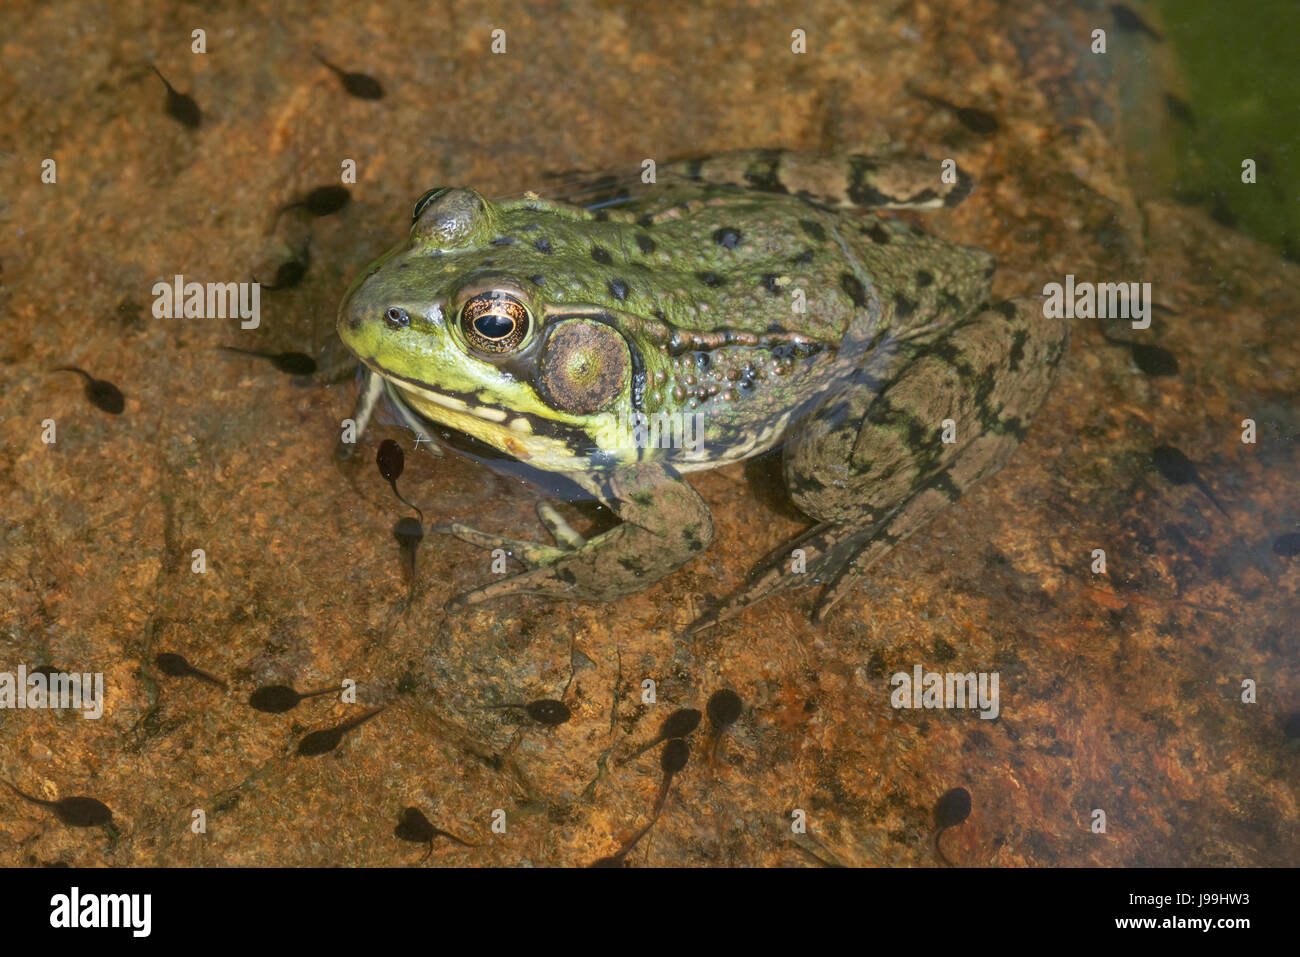 Green Frog (Lithobates clamitans) resting on rock in pond, with toad tadpoles, E USA Stock Photo